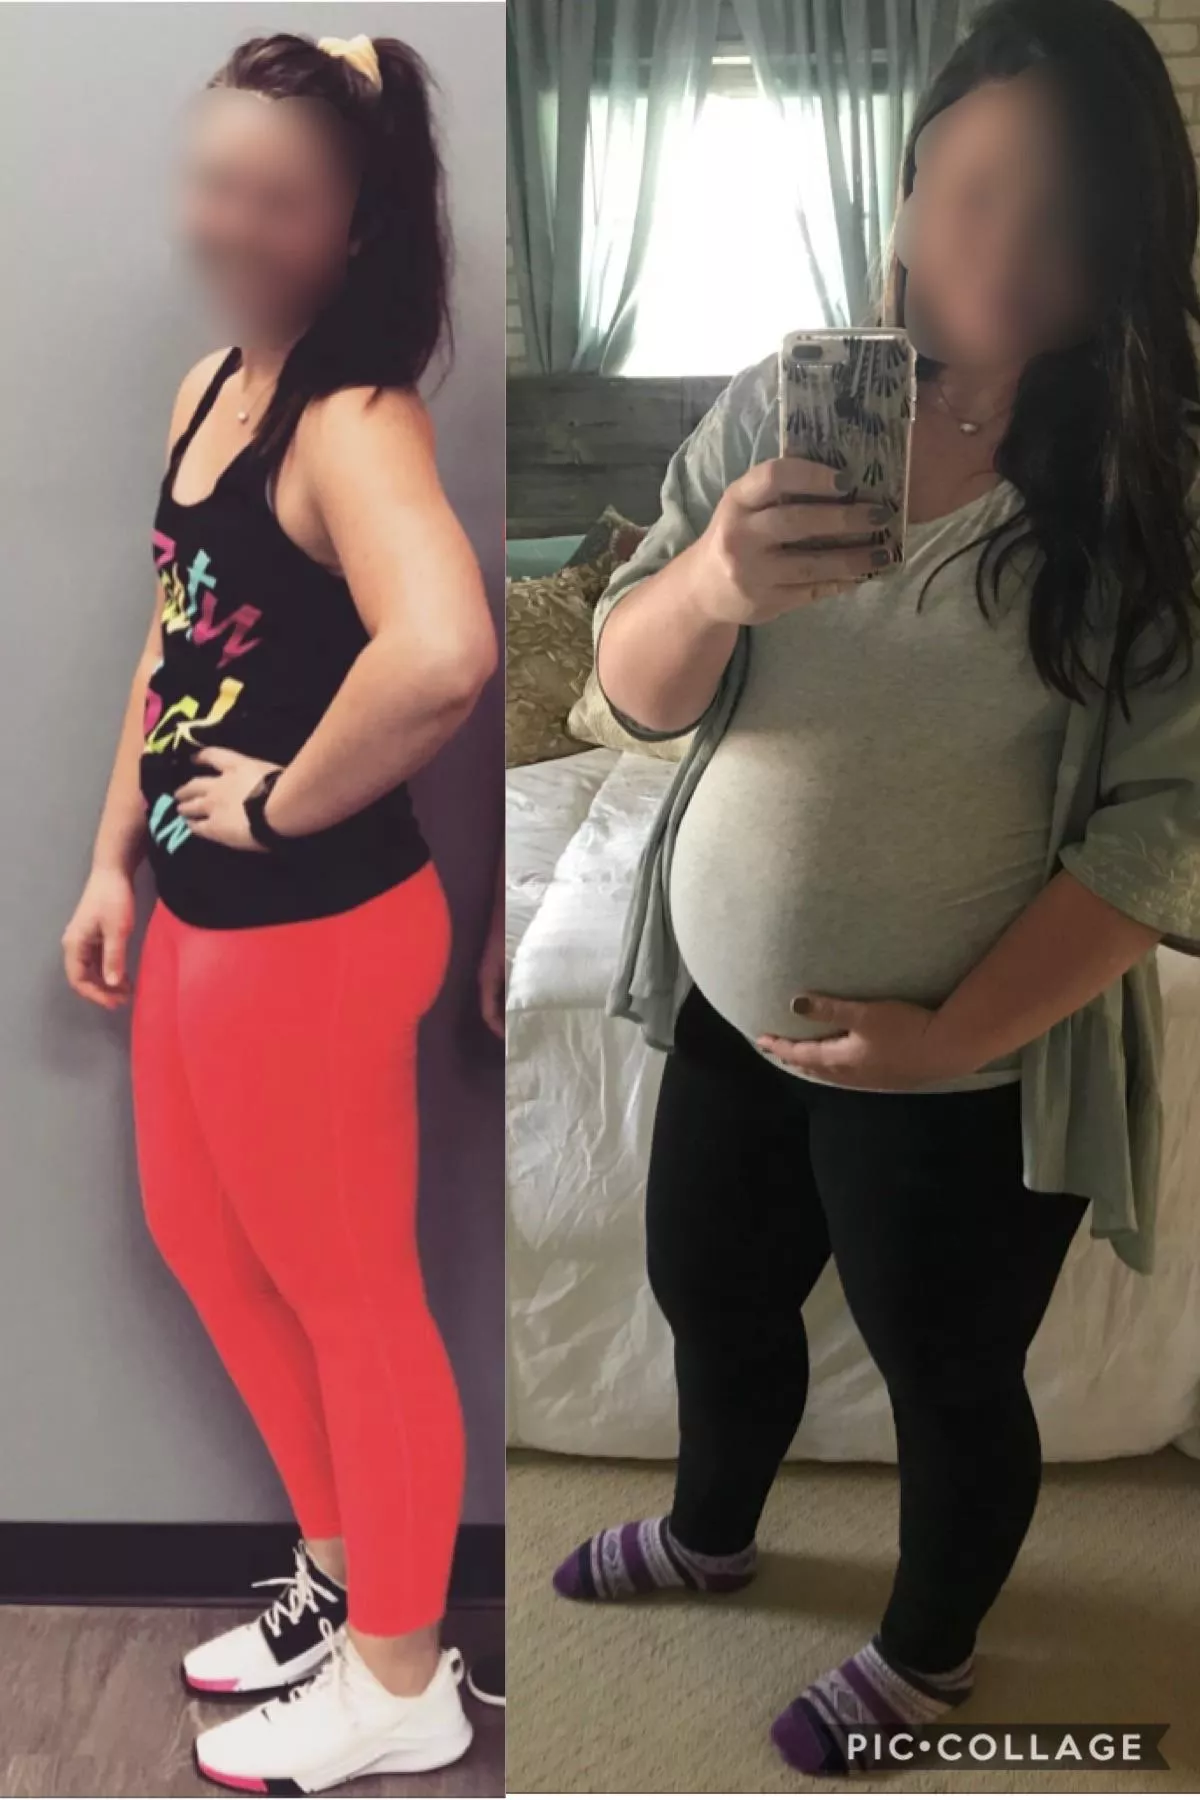 Pregnancy really helped my wife grow